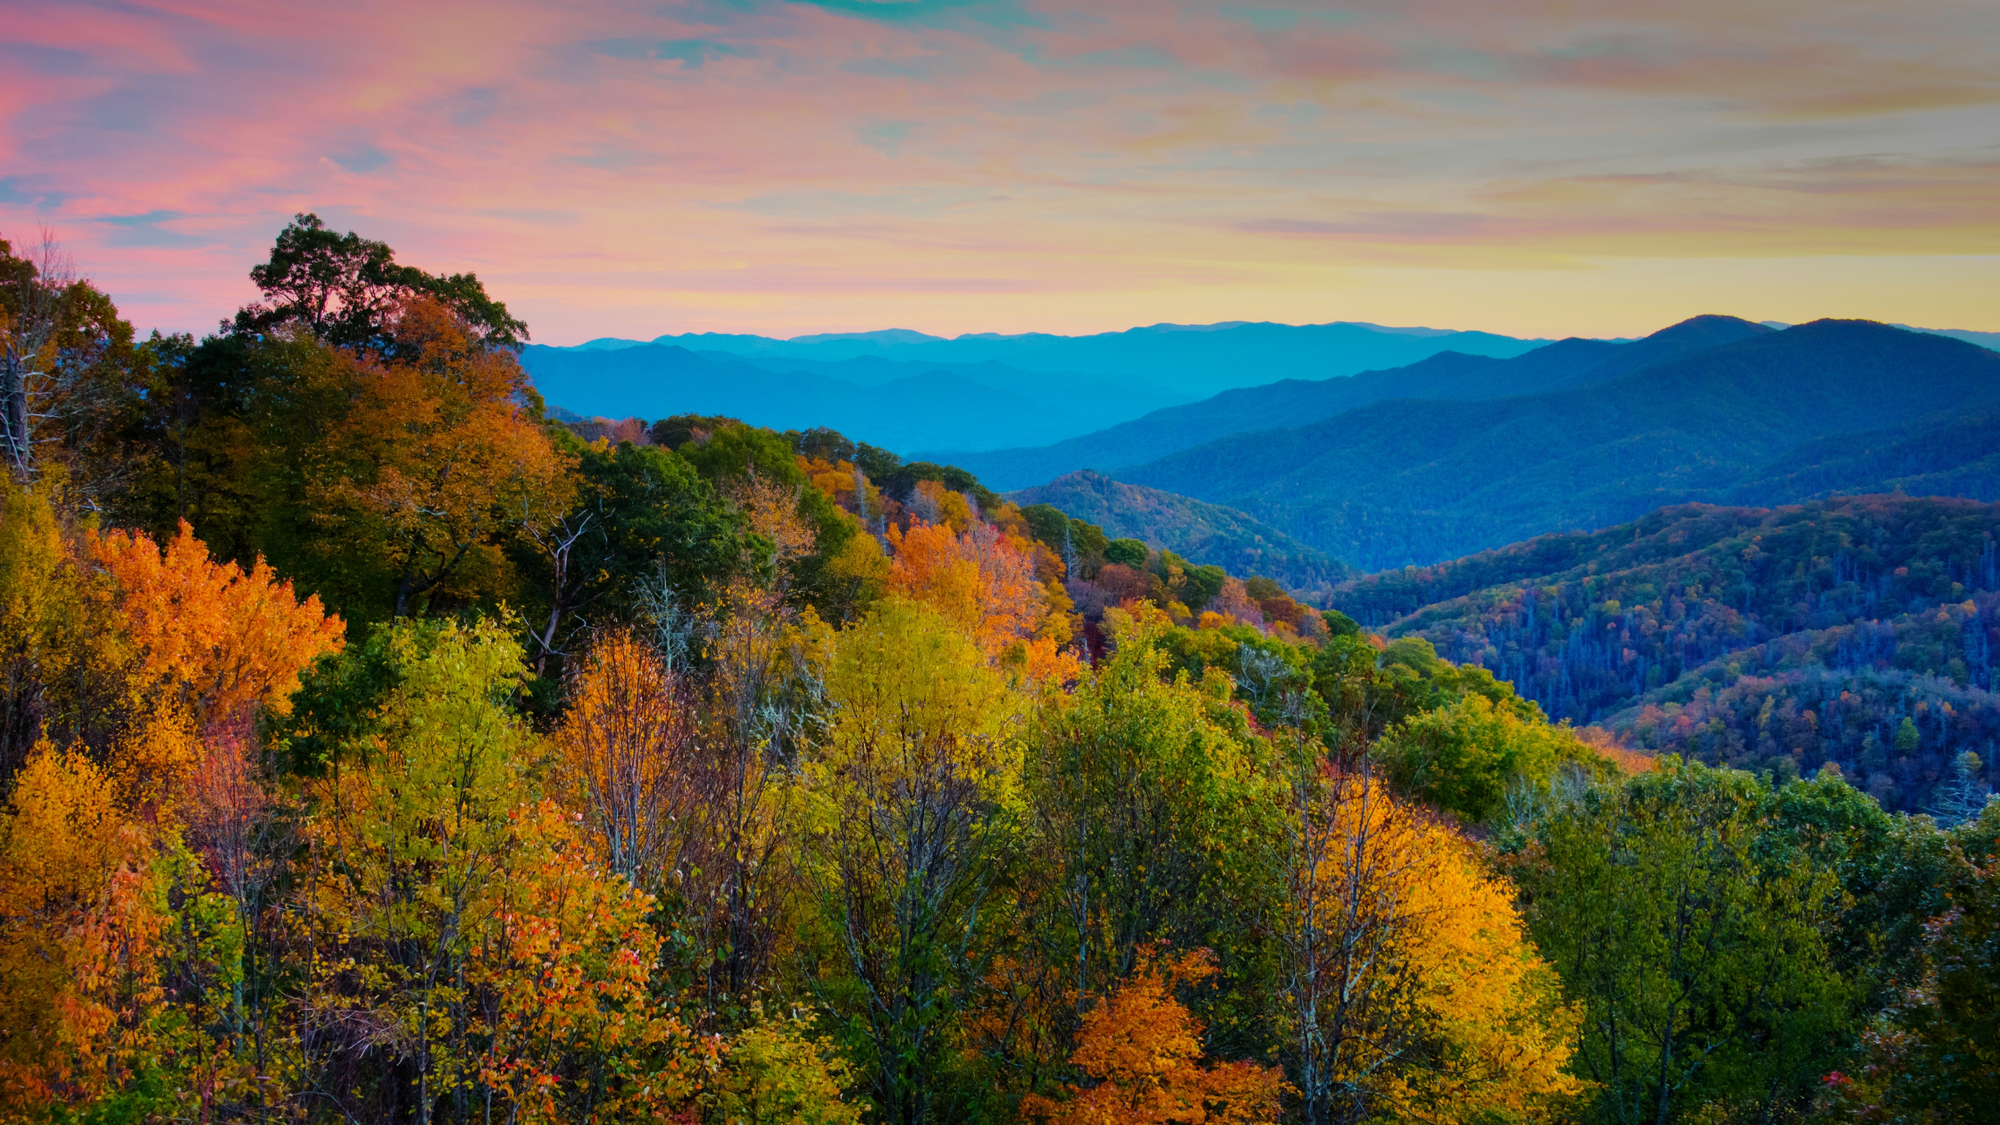 Stunning autumn sunset over the Smoky Mountains, highlighting the vibrant colors and scenic beauty for visitors to enjoy.